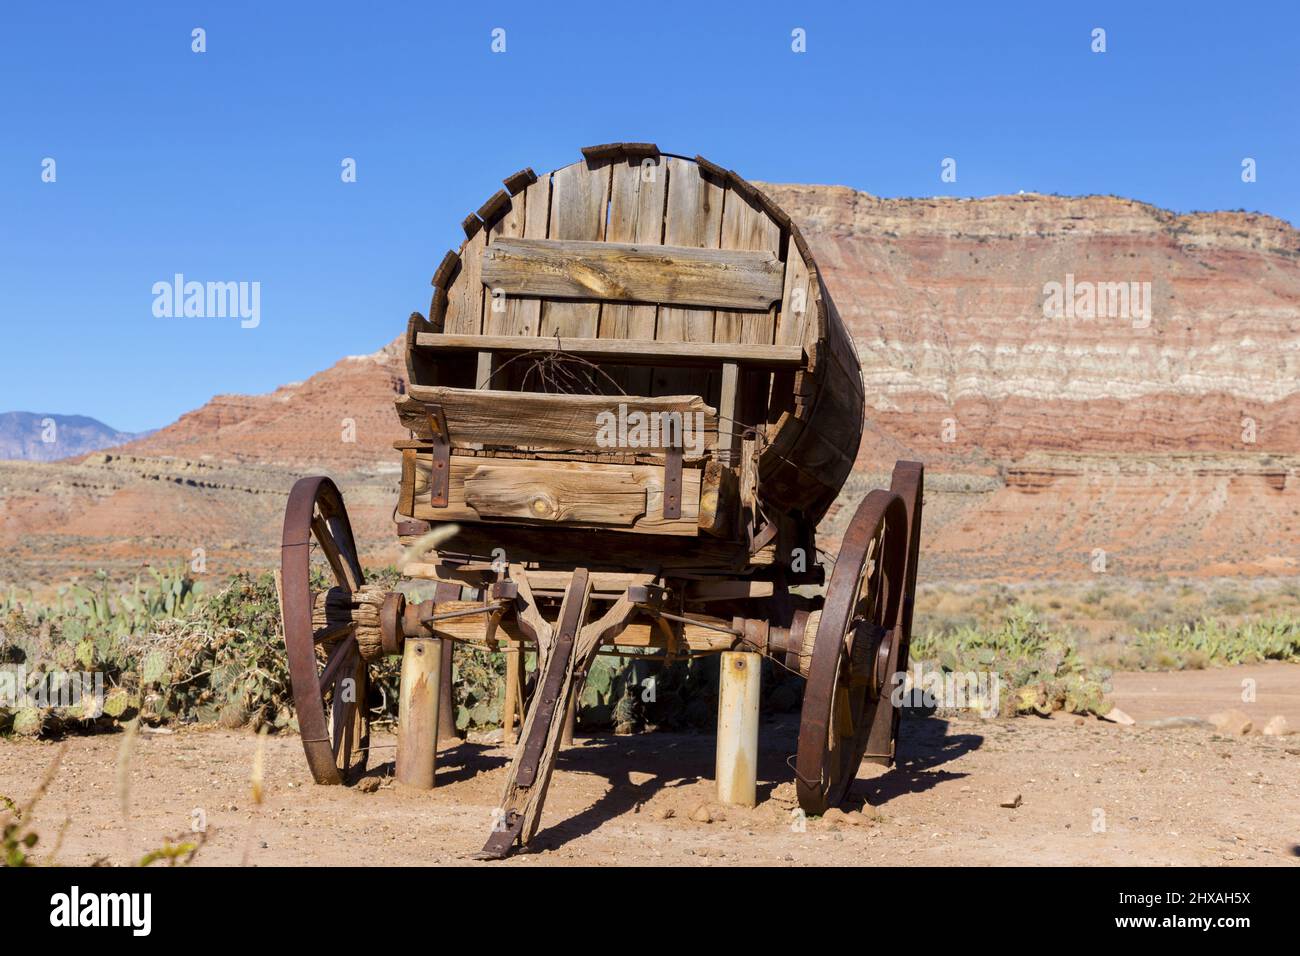 Isolated Old Vintage Wooden Wild West Stage Coach Wagon Wheel Replica with Western Red Rock Canyon Cliffs Utah Landscape in the Background Stock Photo